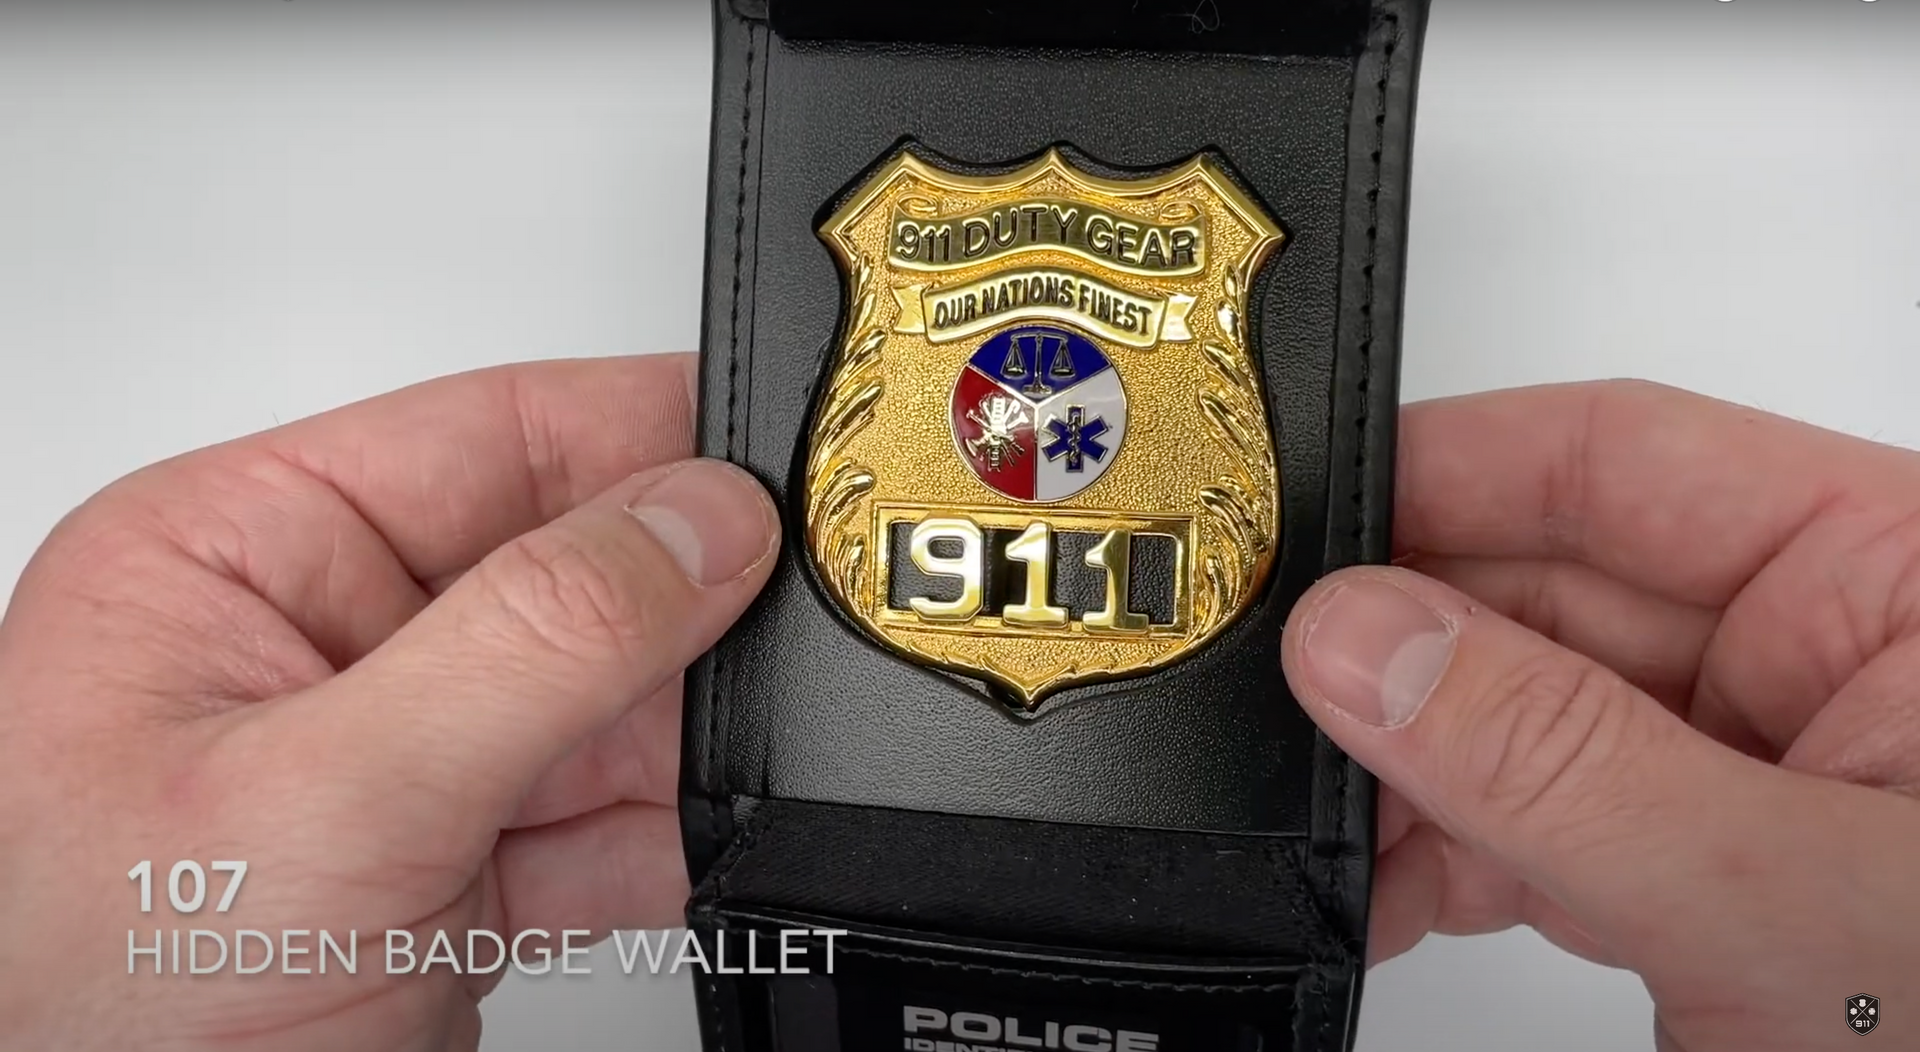 Load video: 107 Leather Badge Wallet by Perfect fit Product Video Best Badge Wallet Canada